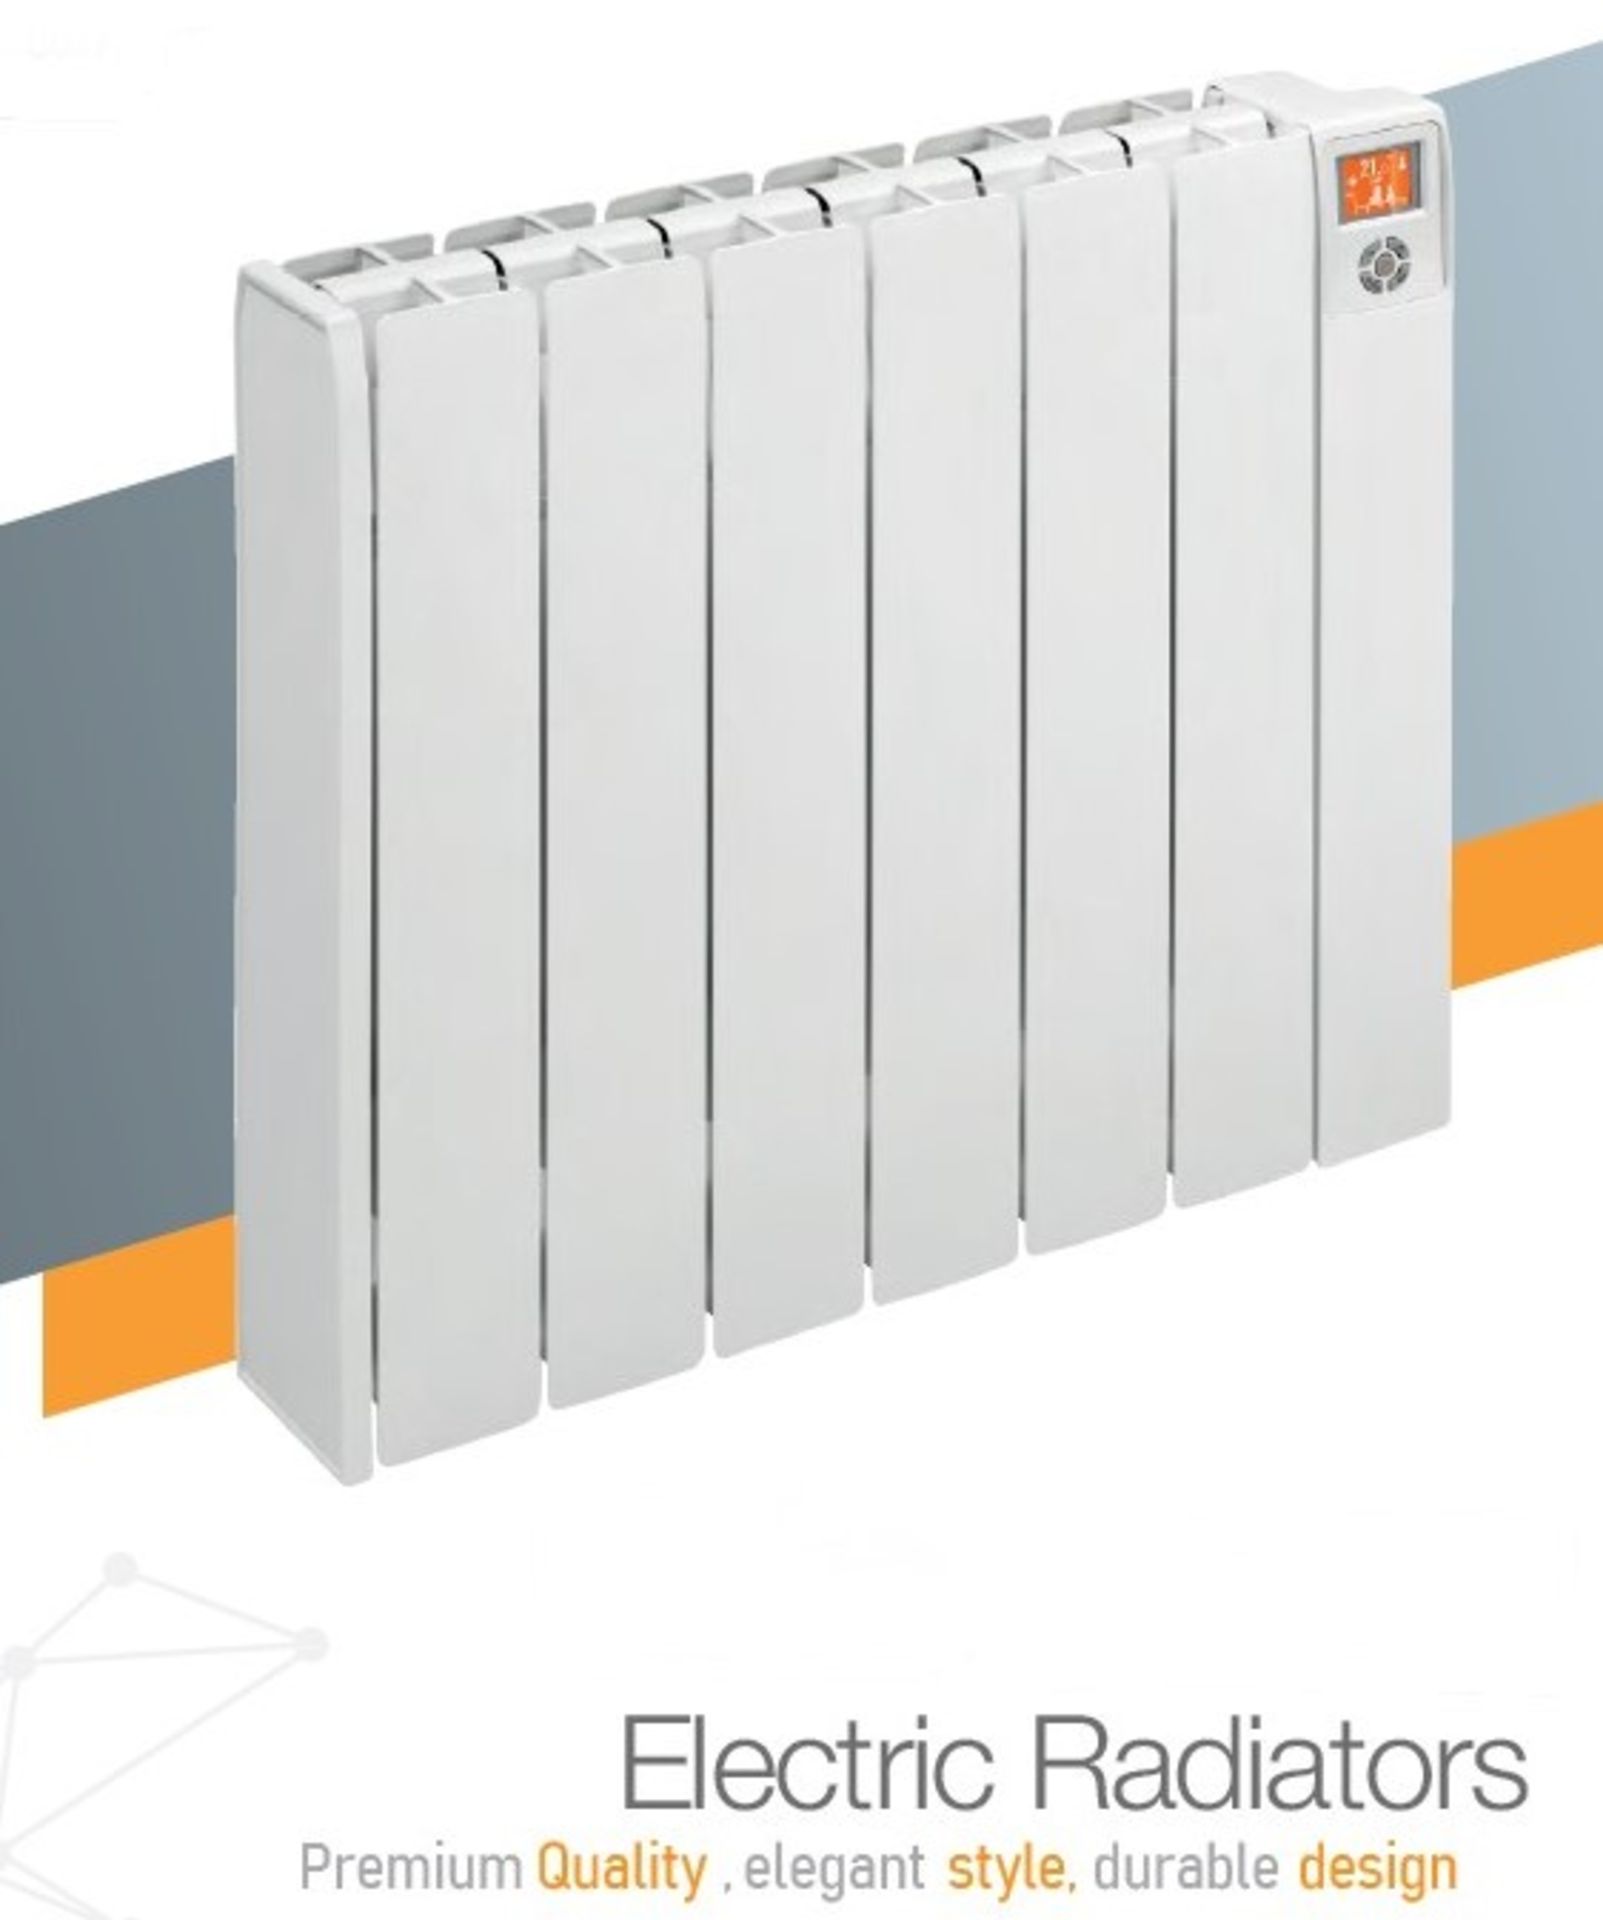 A 1500 Watt Electric Radiator - Fluid Filled with Aluminium Elements, - Image 6 of 6